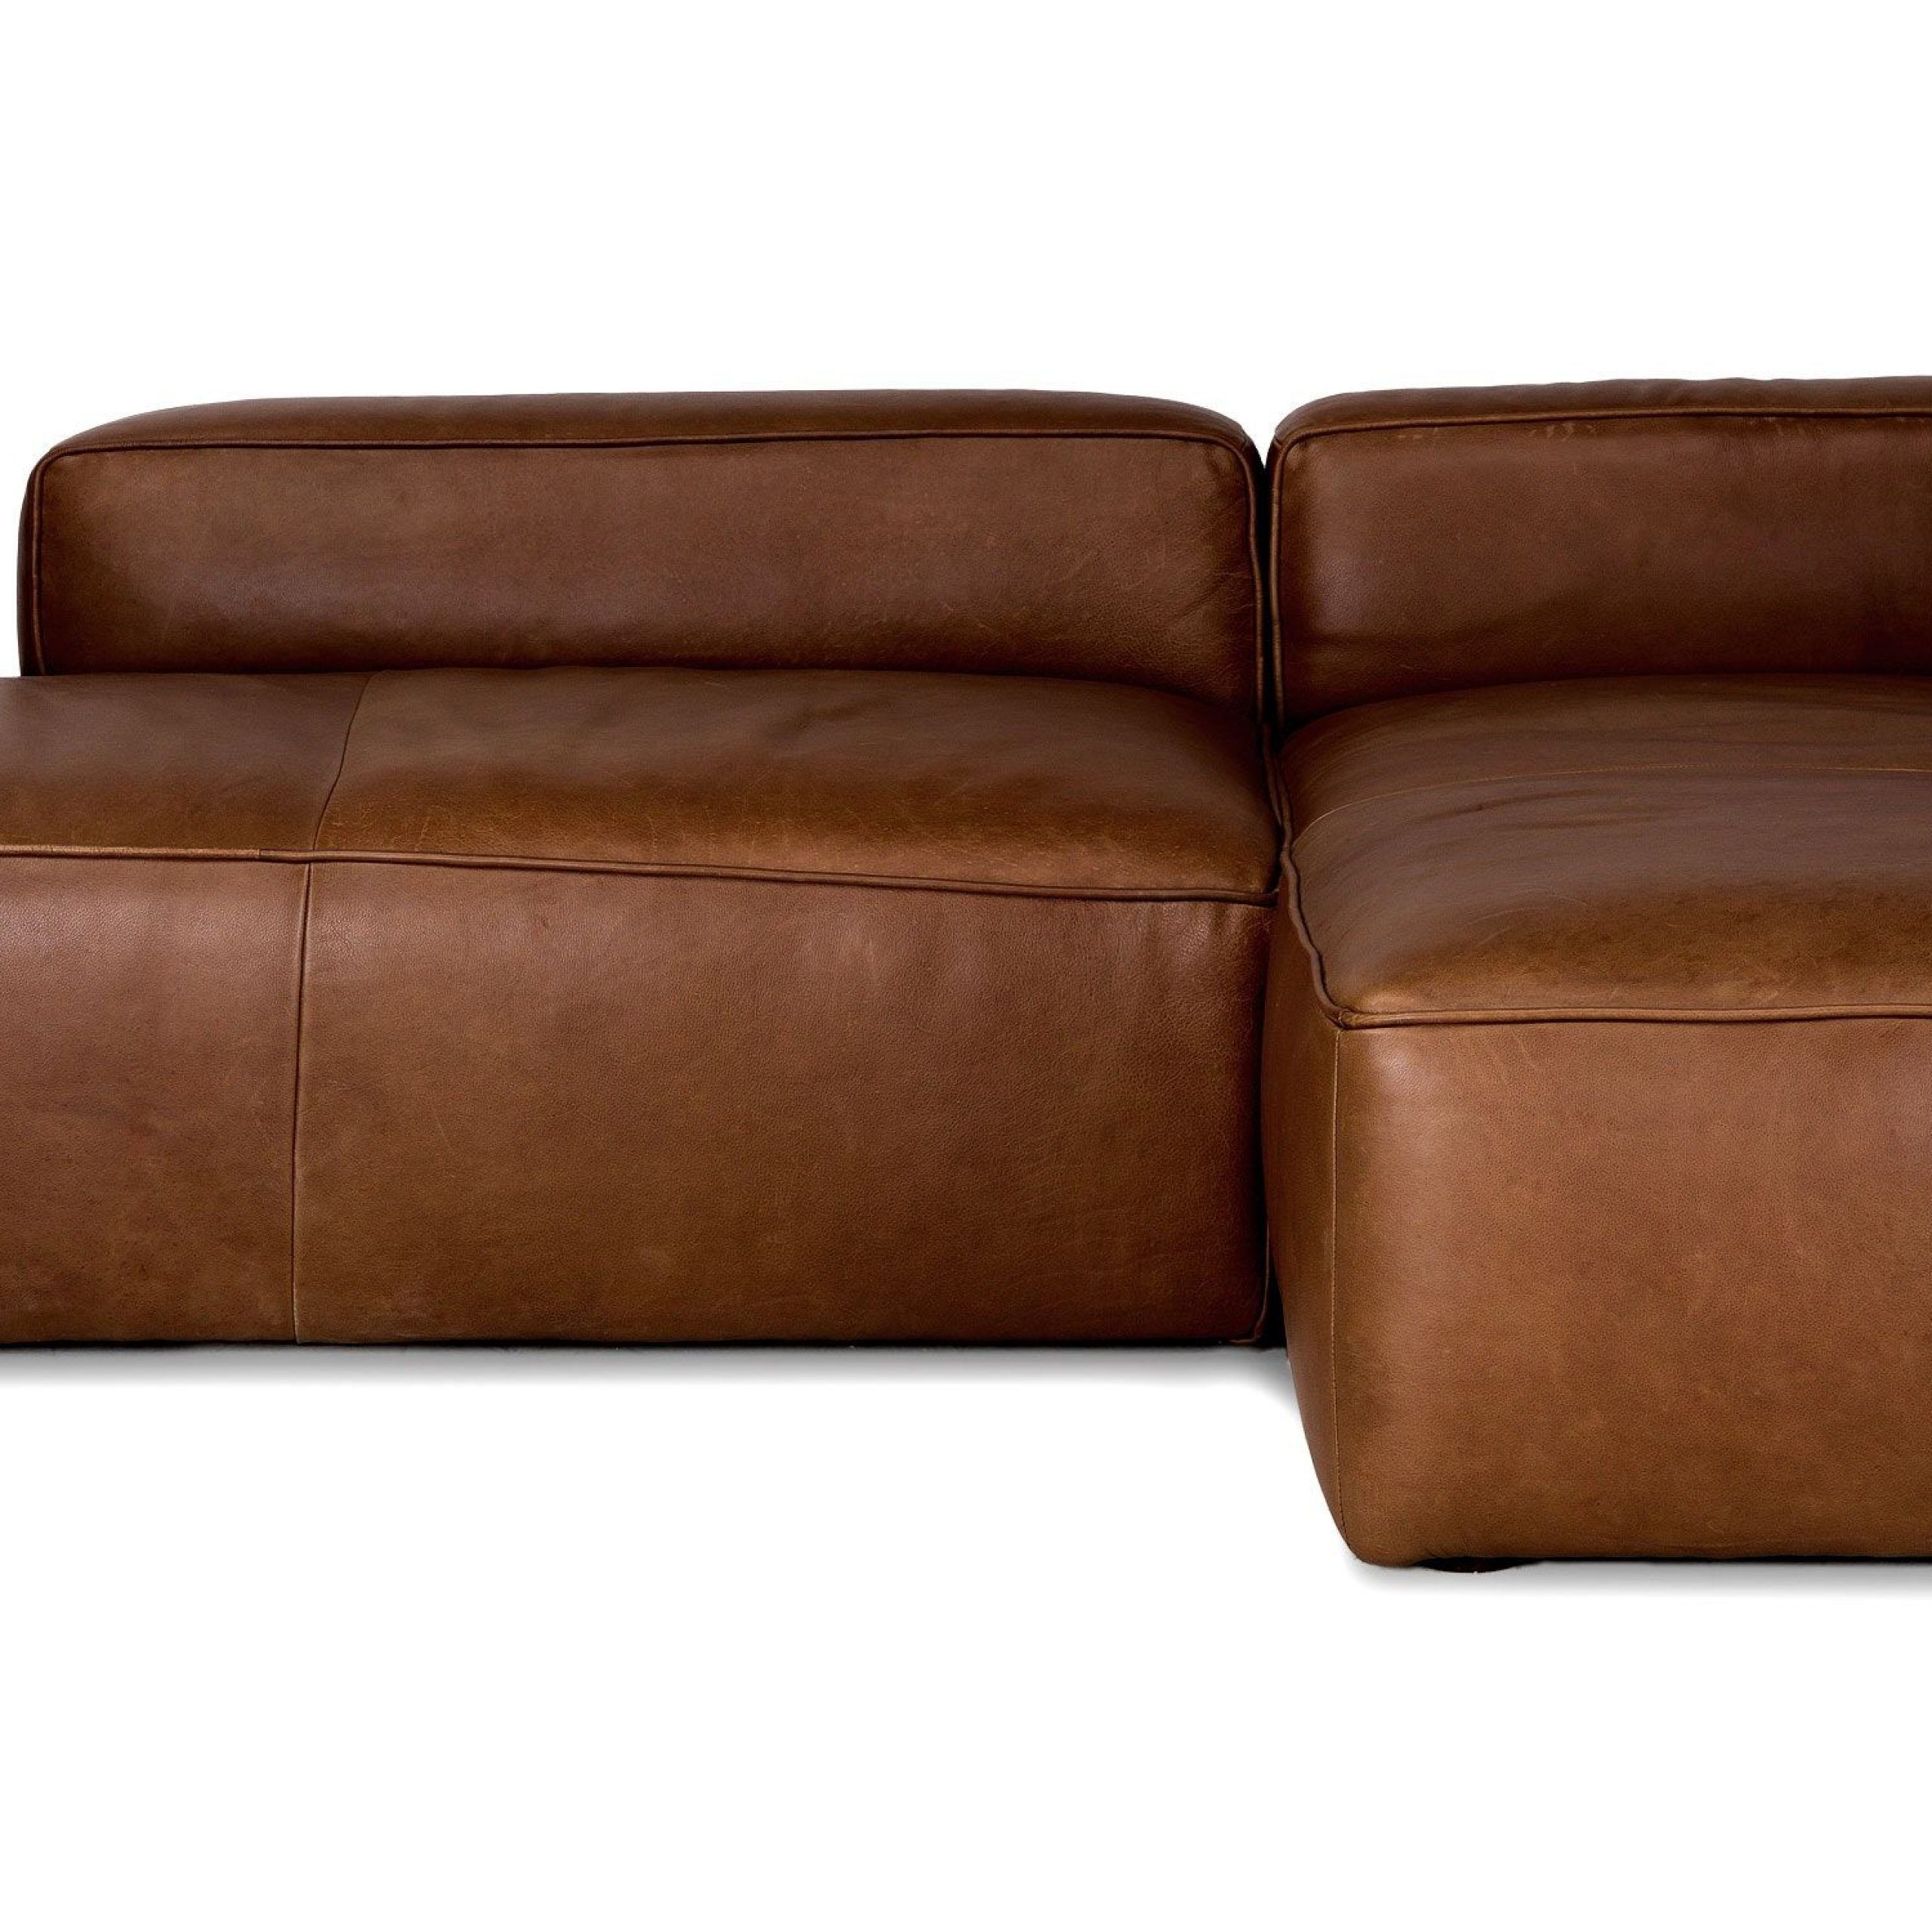 Mello Taos Brown Right Sectional | Mid Century Modern Sofa In Florence Mid Century Modern Right Sectional Sofas (View 15 of 15)